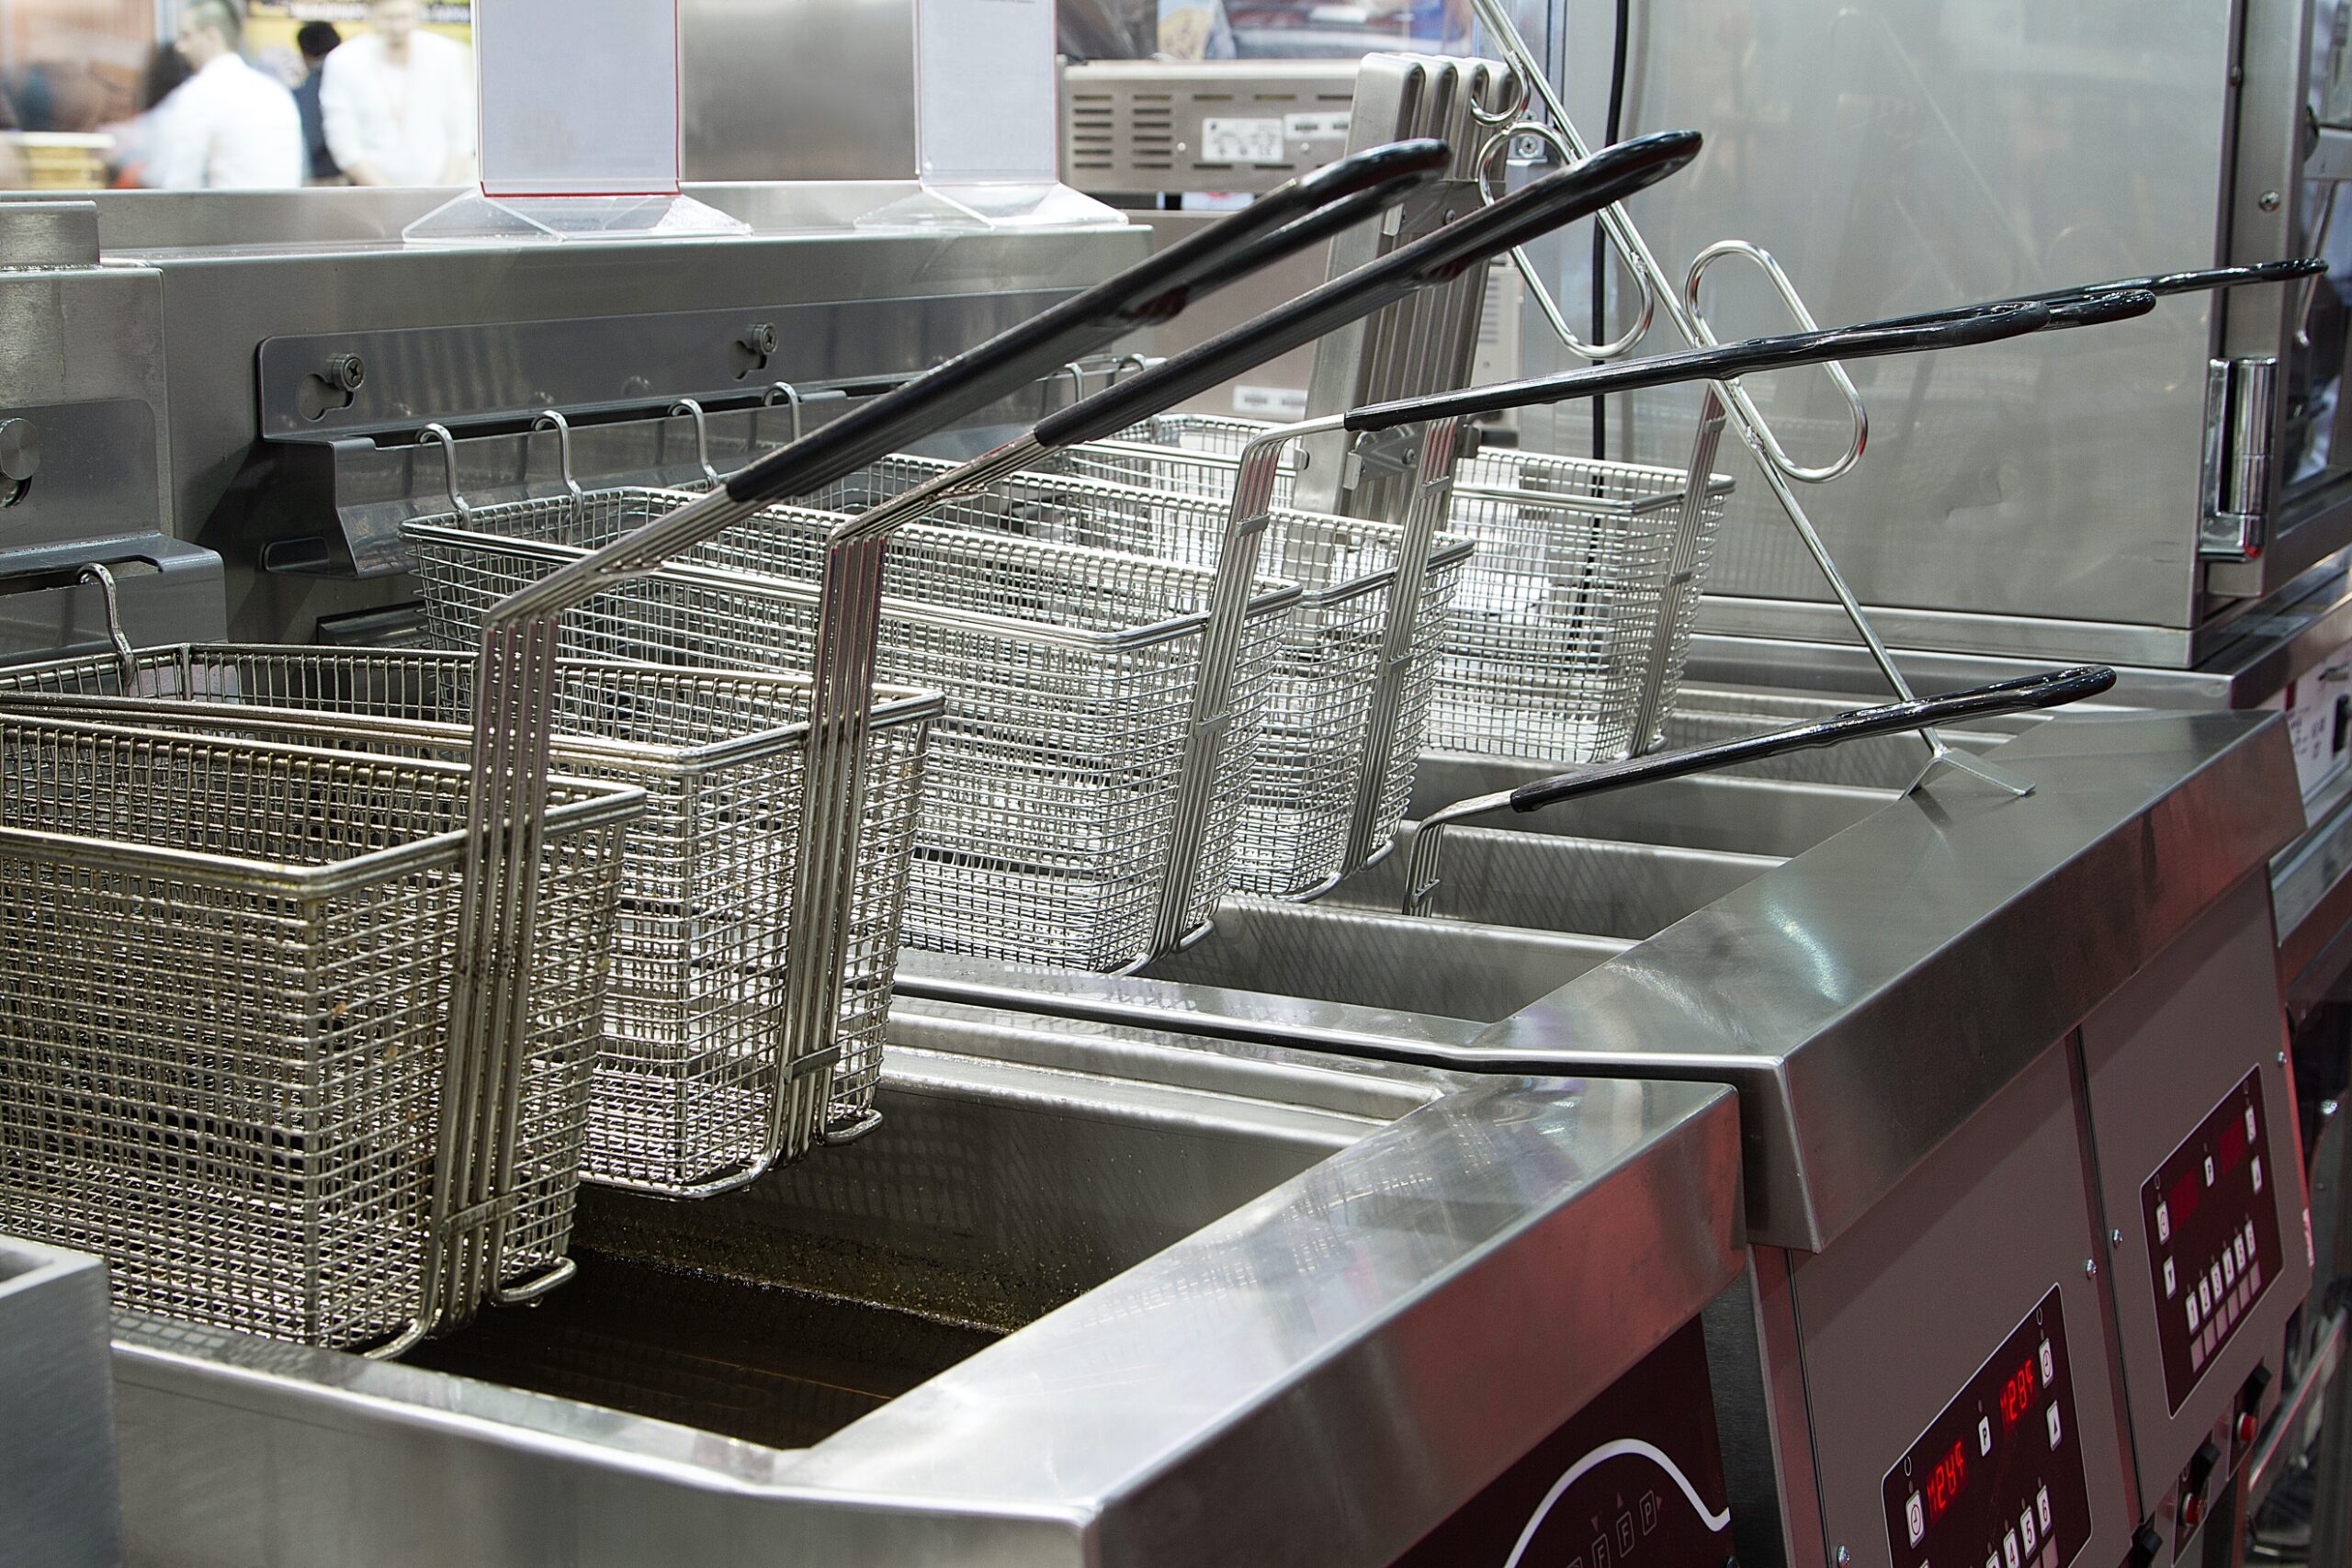 frying baskets in an industrial kitchen